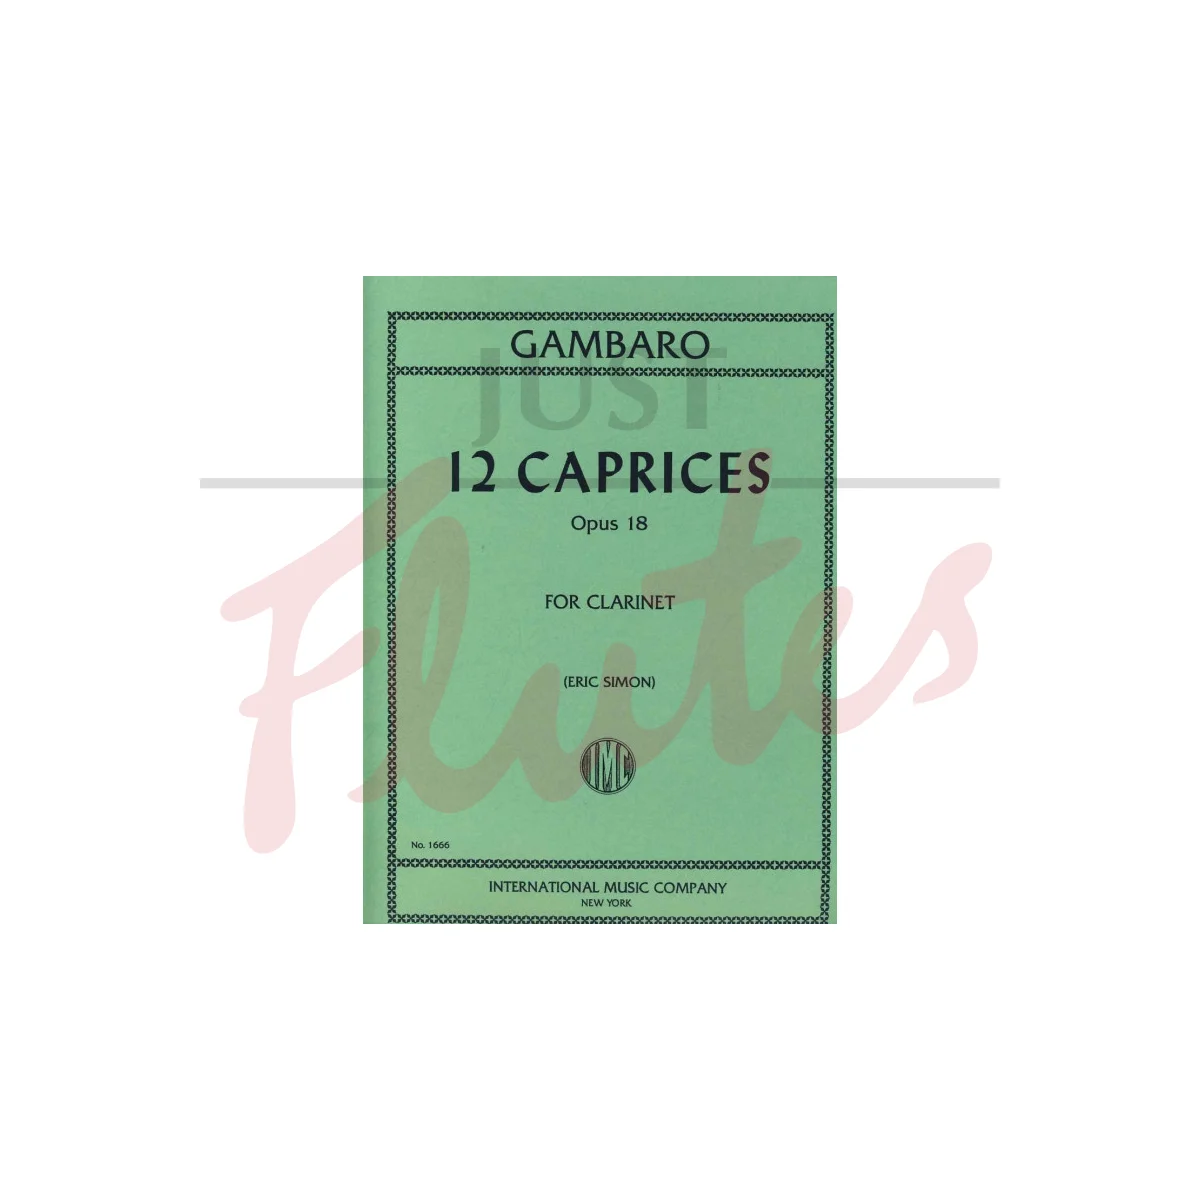 12 Caprices for Clarinet